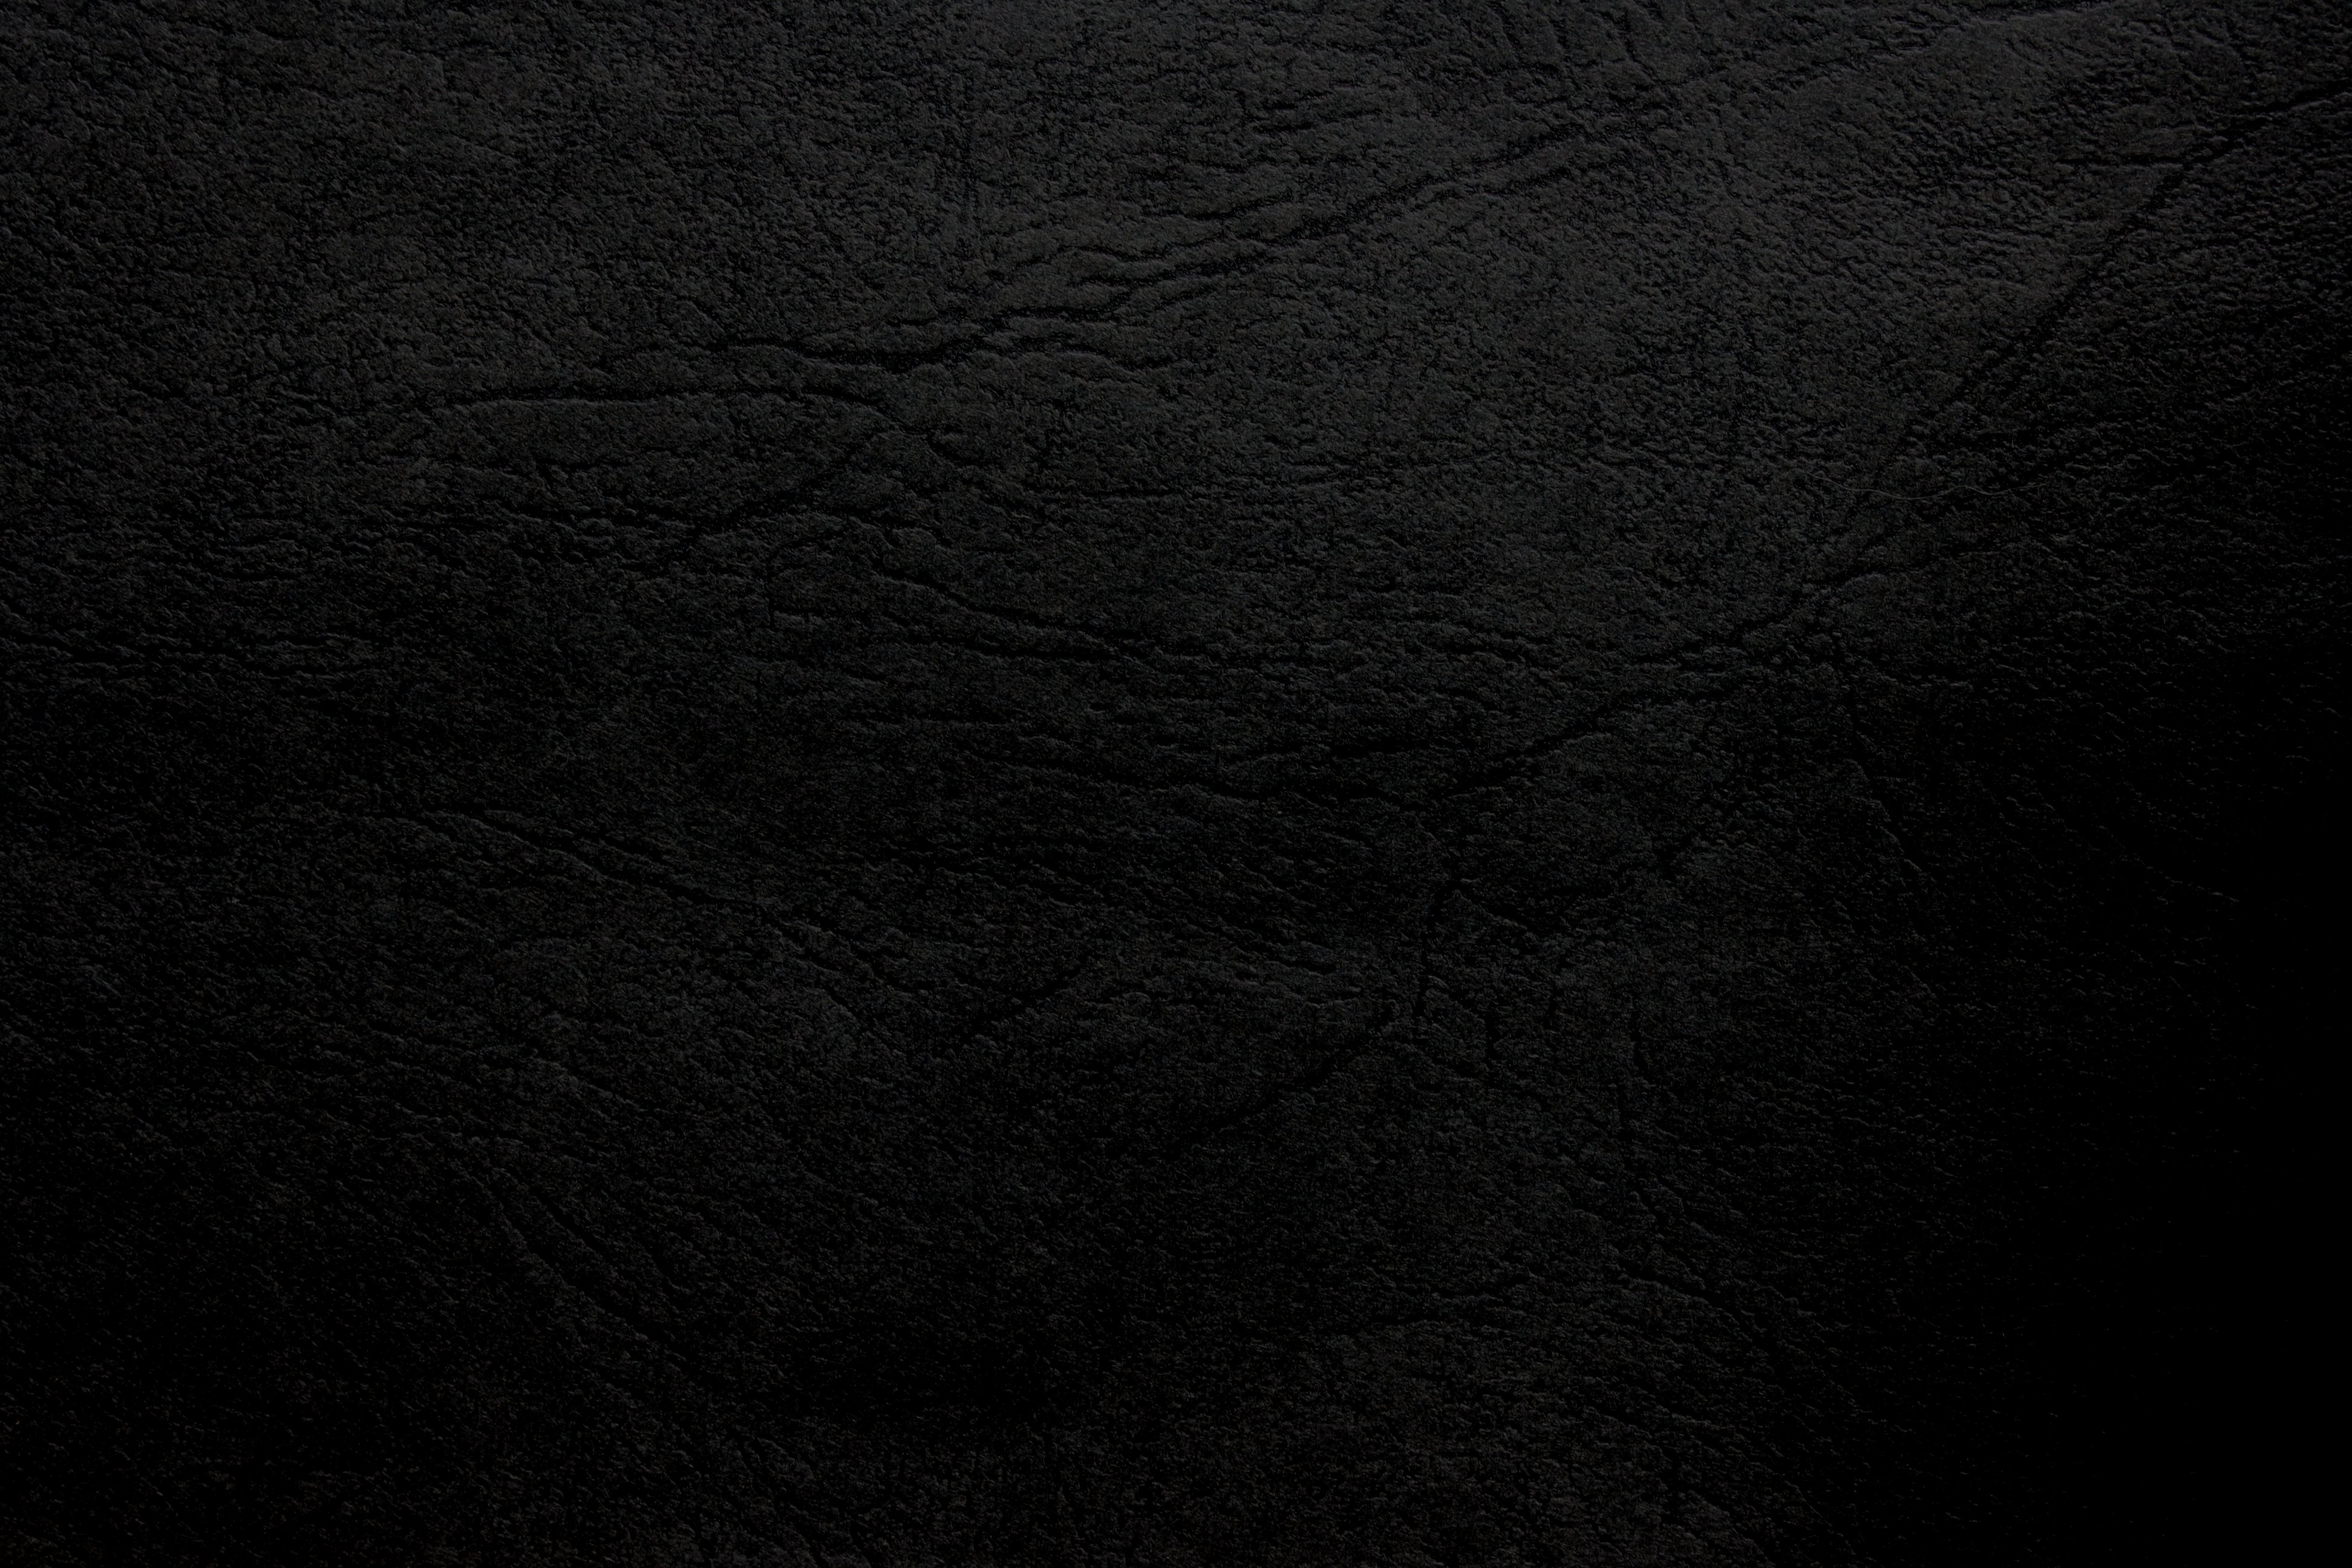 Black Leather Texture High Resolution Photo Dimensions